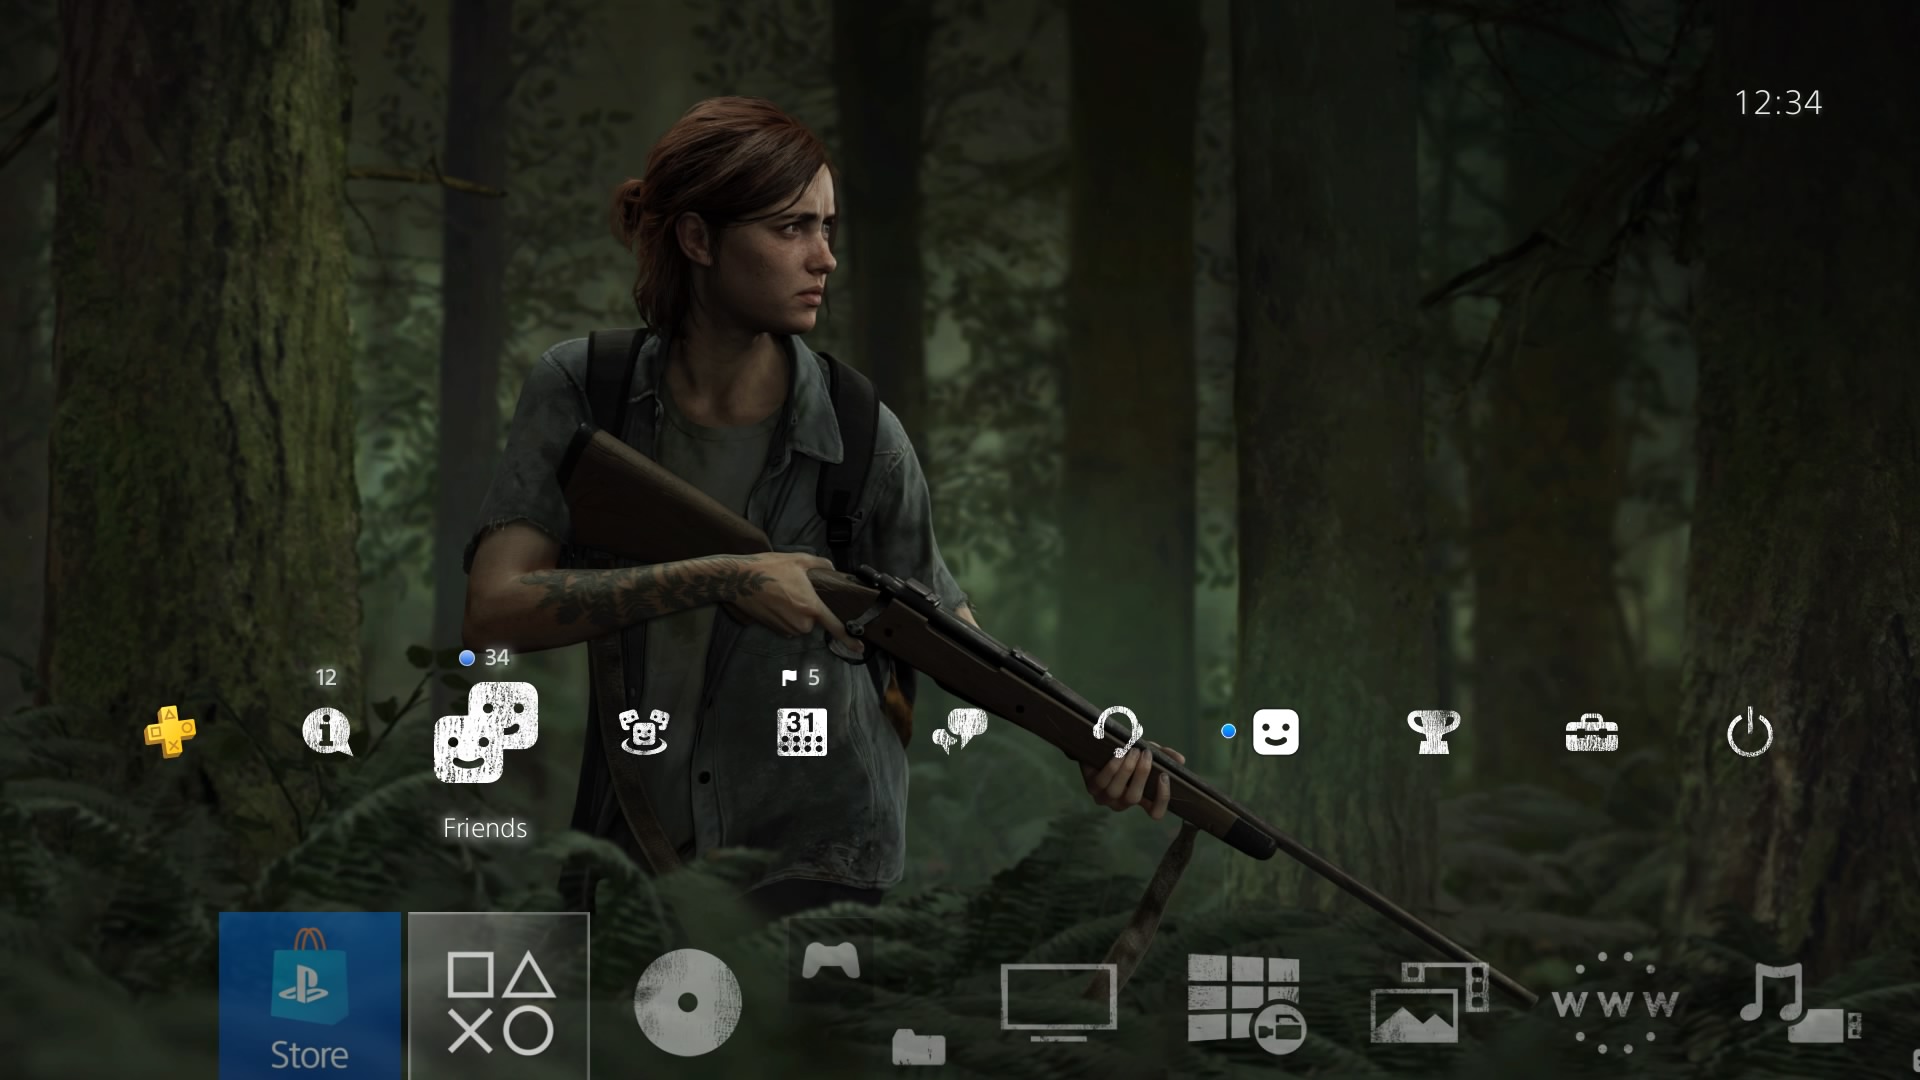 Get a free The Last of Us Part II PS4 dynamic theme - EGM